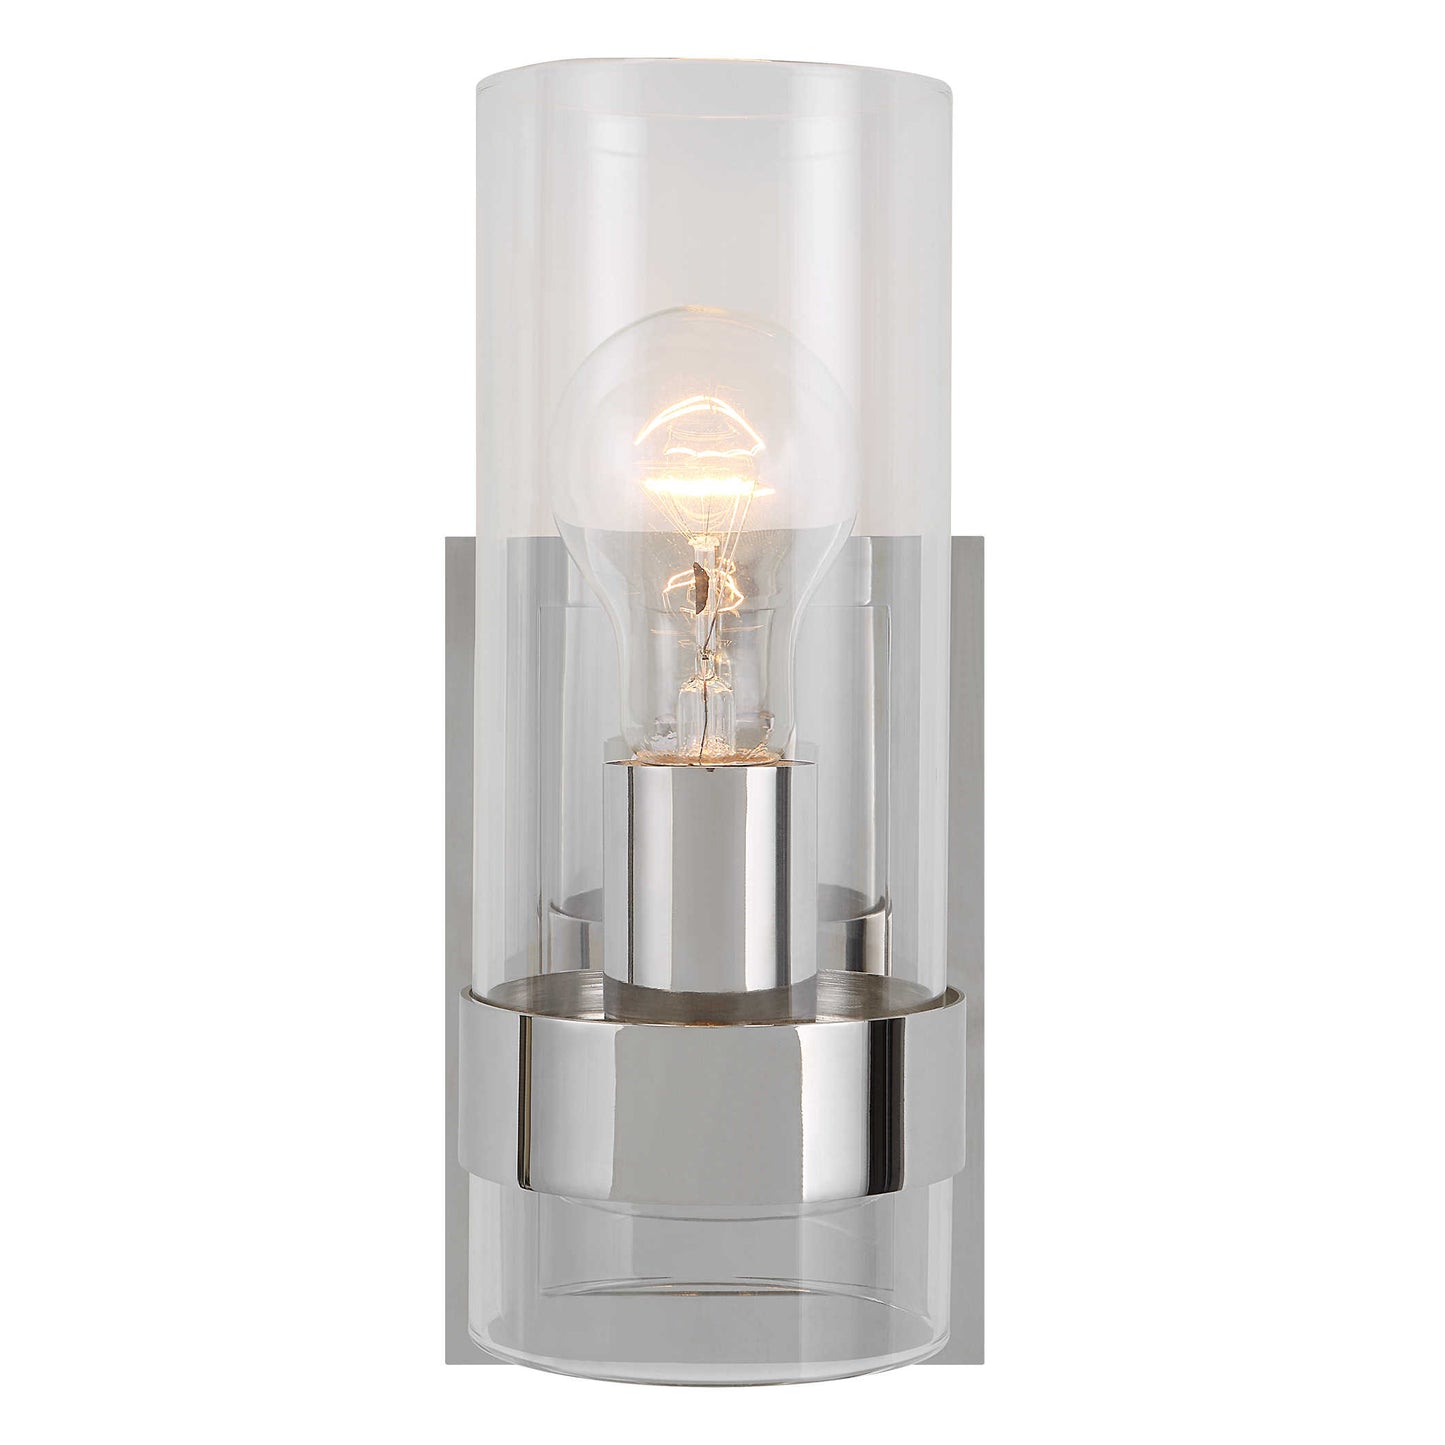 CARDIFF SCONCE LIGHT COLLECTION